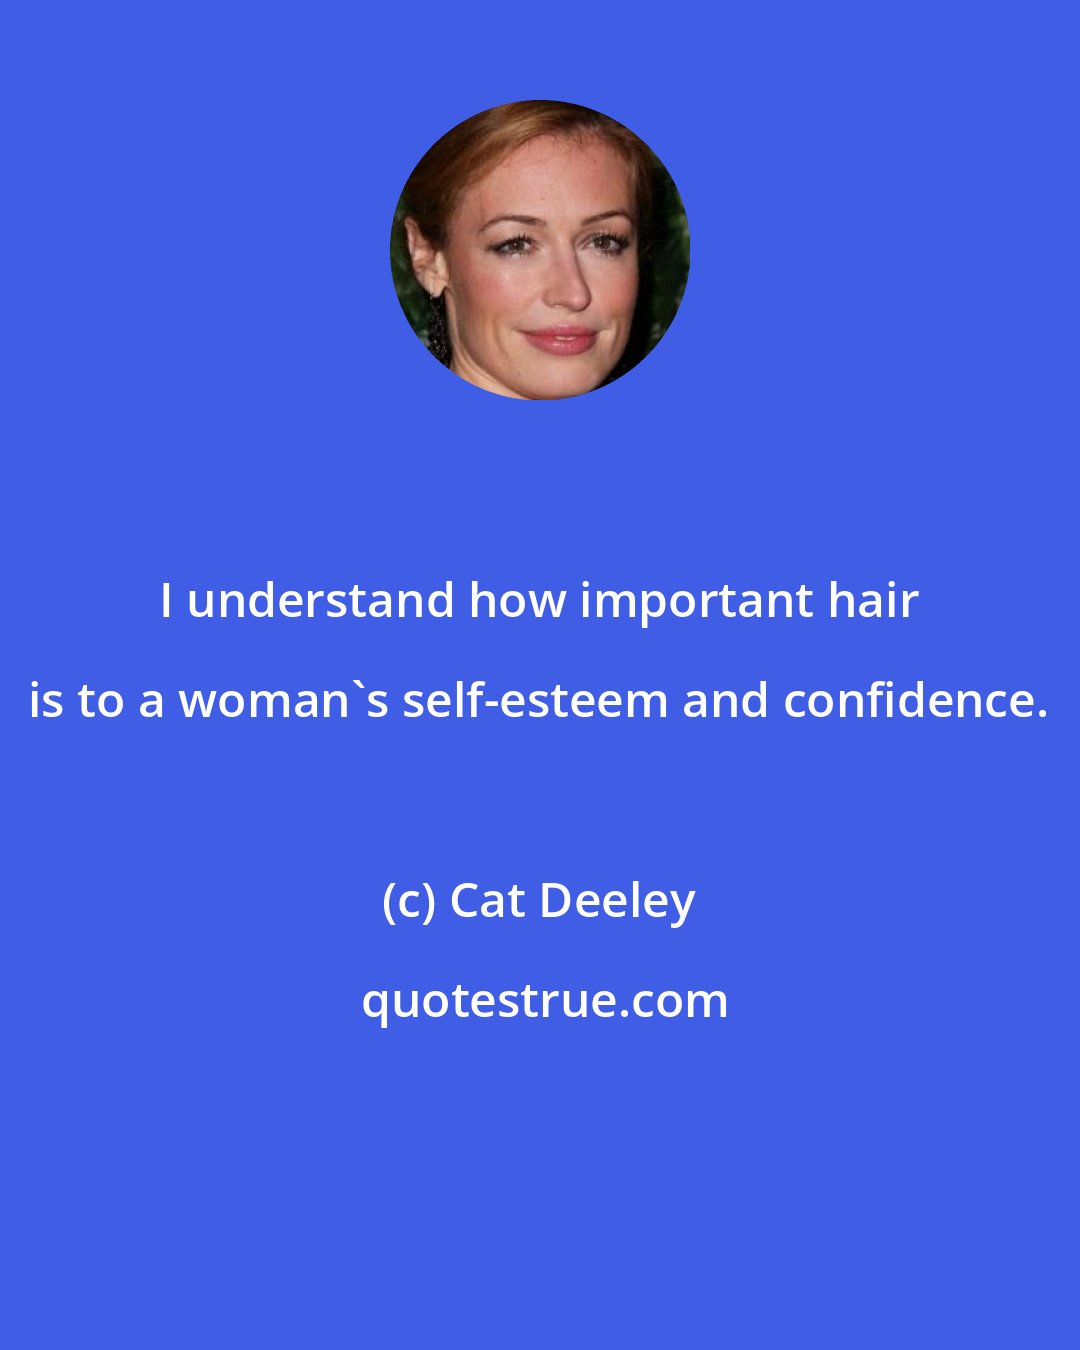 Cat Deeley: I understand how important hair is to a woman's self-esteem and confidence.